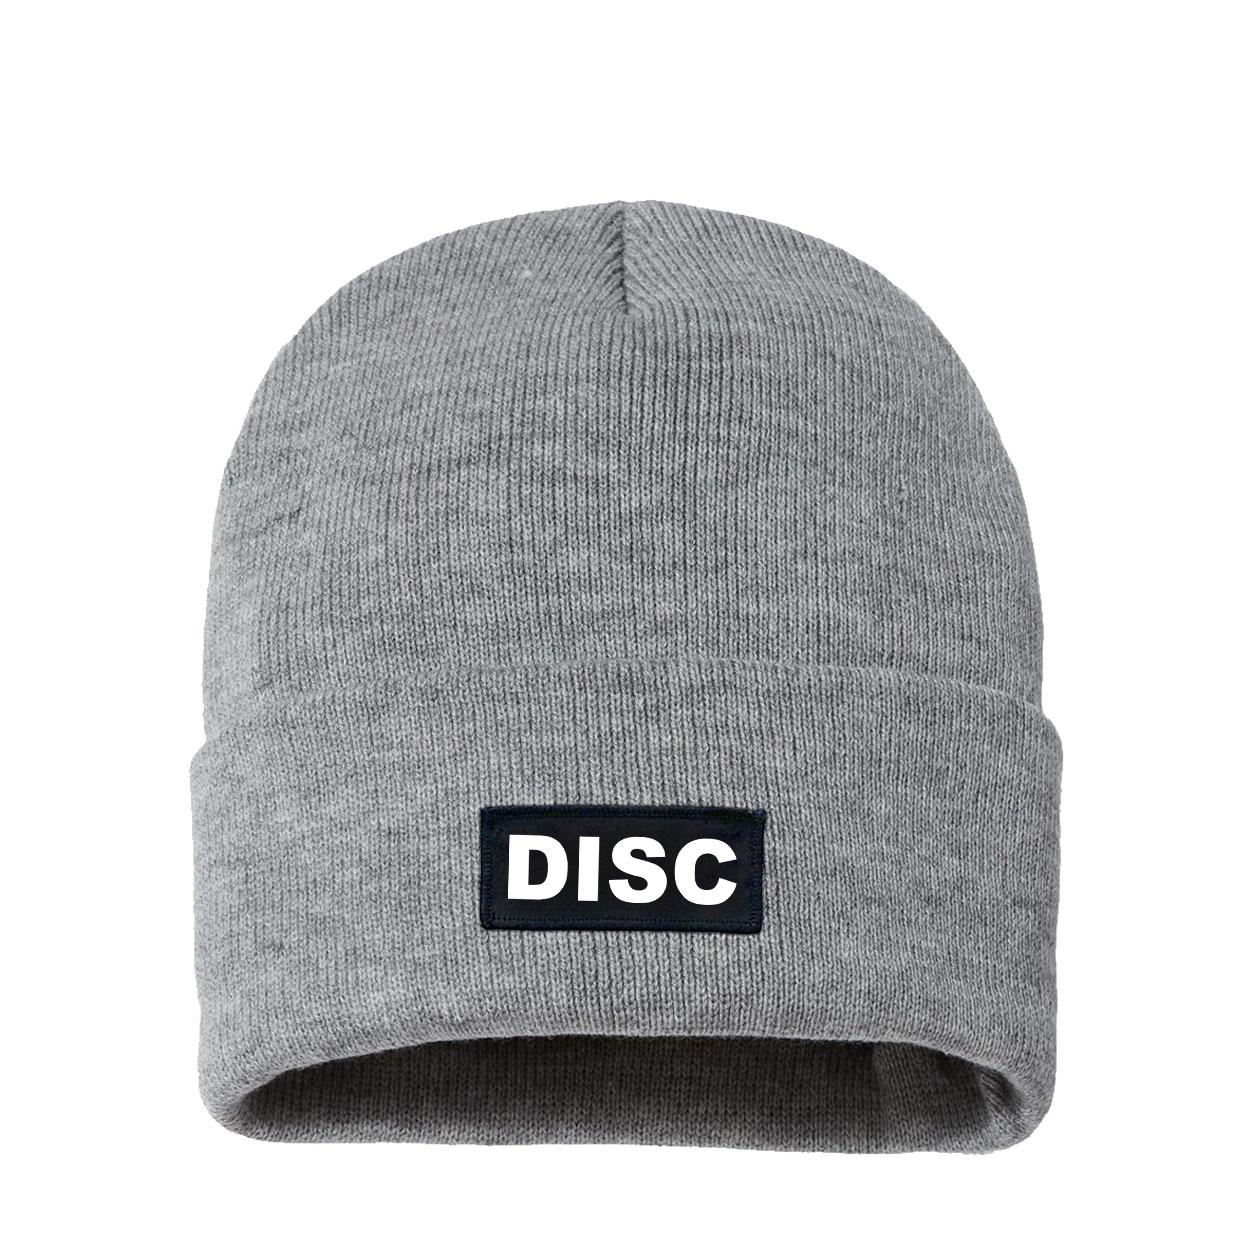 Disc Brand Logo Night Out Woven Patch Sherpa Lined Cuffed Beanie Heather Gray